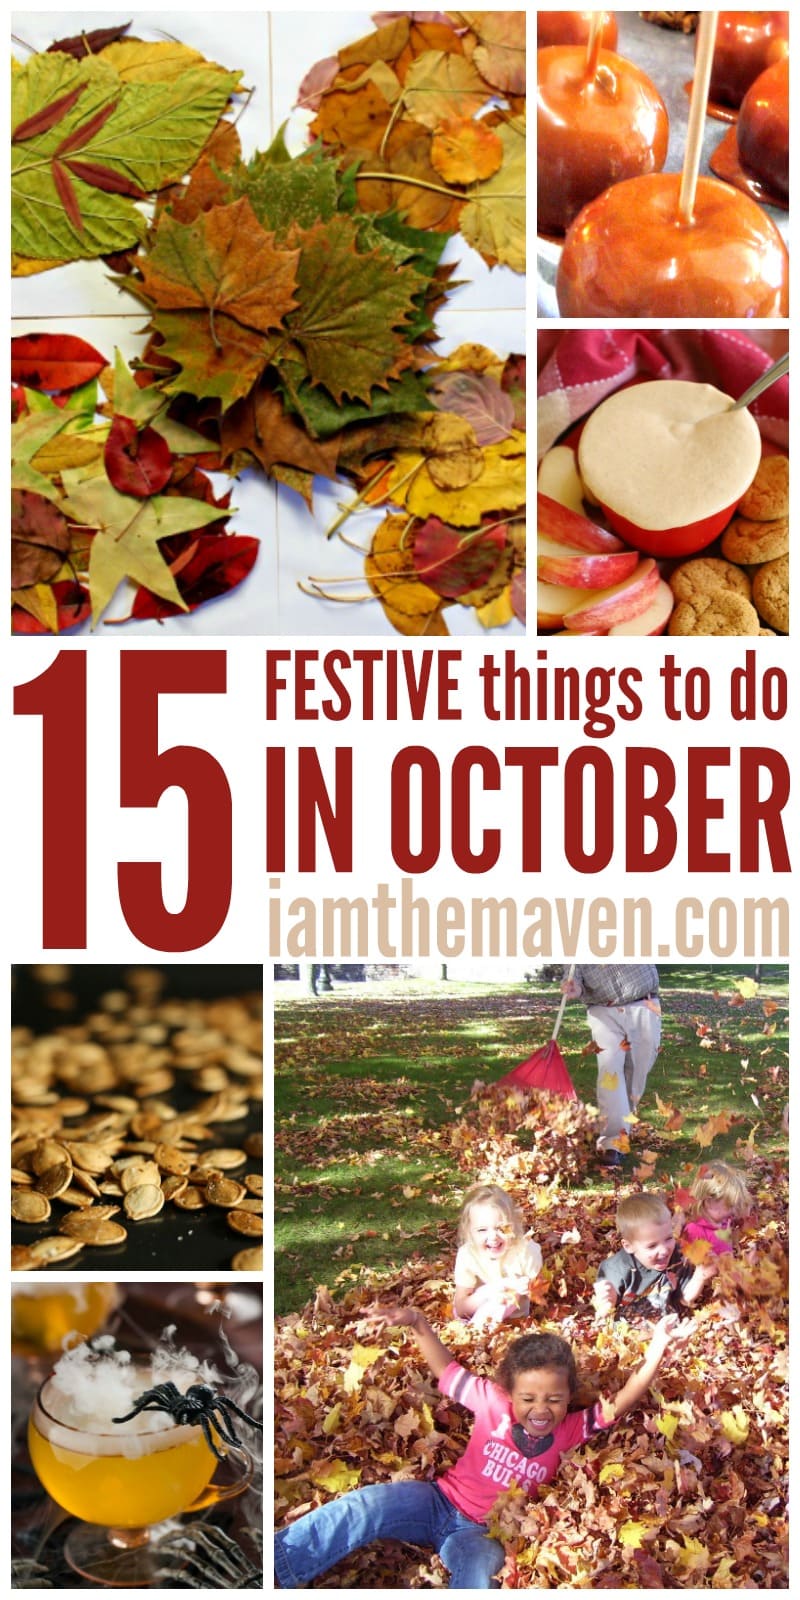 15 Festive Things to Do in October